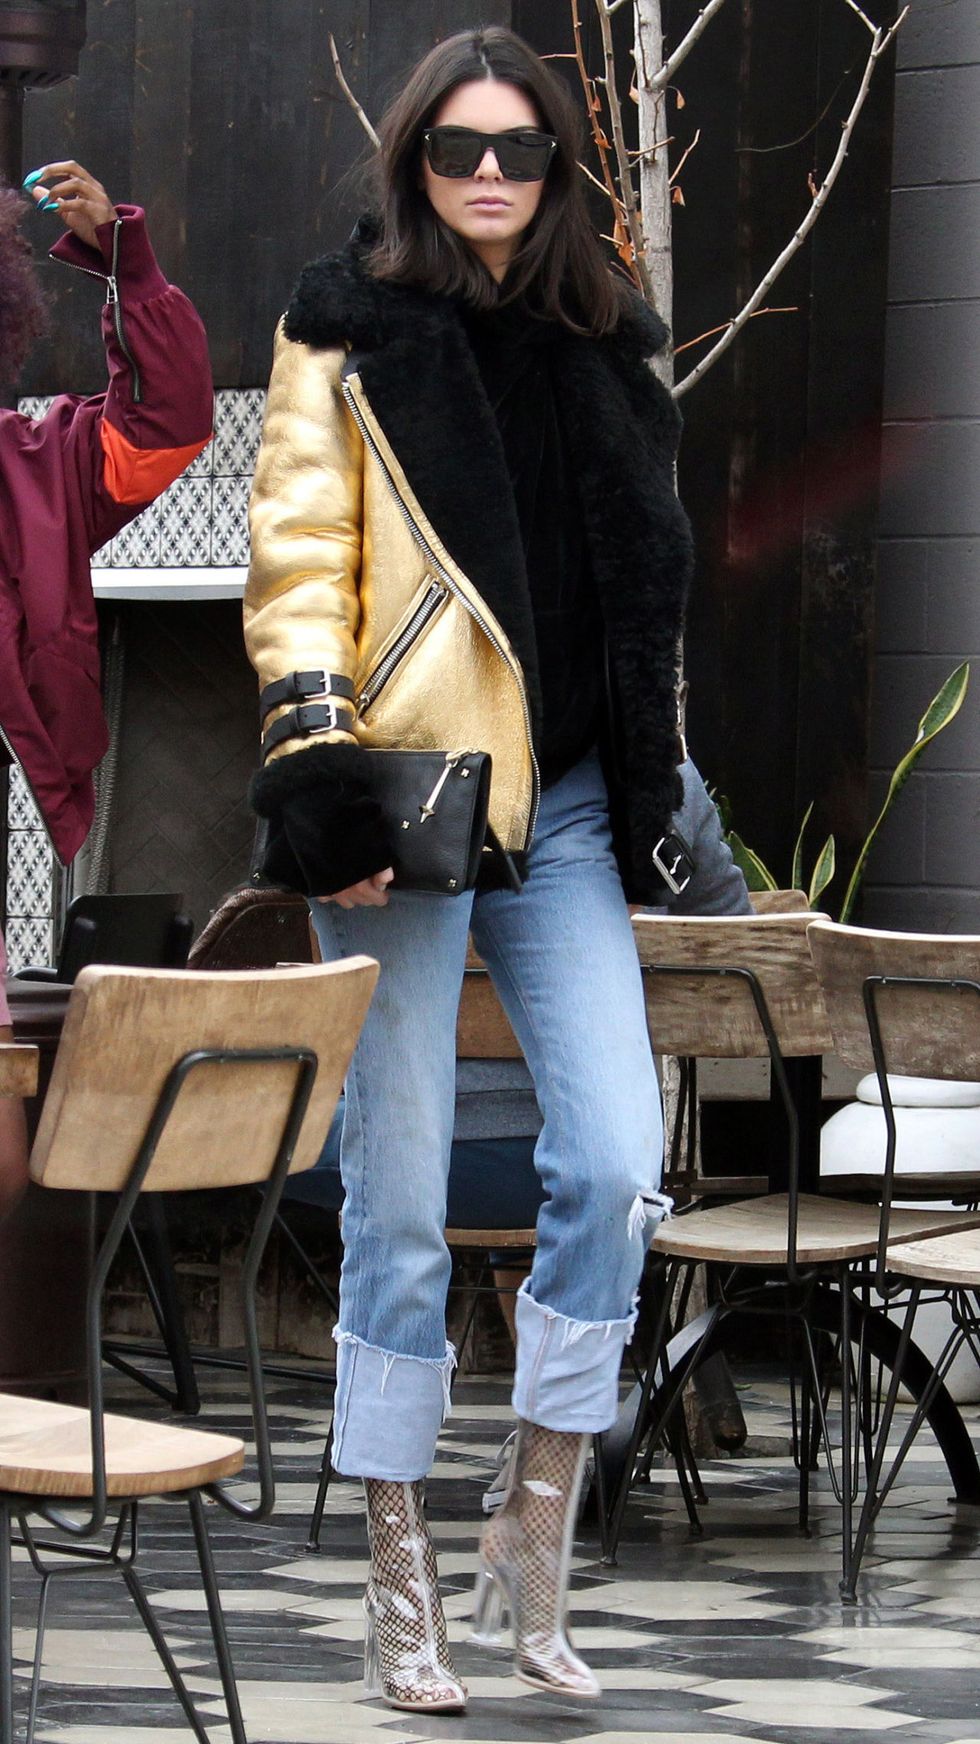 Kendall Jenner went for lunch with friends in West Hollywood.&#xA;&lt;P&gt;&#xA;Pictured: Kendall Jenner&#xA;&lt;B&gt;Ref: SPL1415462  020117  &lt;/B&gt;&lt;BR/&gt;&#xA;Picture by: JLM / Splash News&lt;BR/&gt;&#xA;&lt;/P&gt;&lt;P&gt;&#xA;&lt;B&gt;Splash News and Pictures&lt;/B&gt;&lt;BR/&gt;&#xA;Los Angeles:310-821-2666&lt;BR/&gt;&#xA;New York:212-619-2666&lt;BR/&gt;&#xA;London:870-934-2666&lt;BR/&gt;&#xA;photodesk@splashnews.com&lt;BR/&gt;&#xA;&lt;/P&gt;